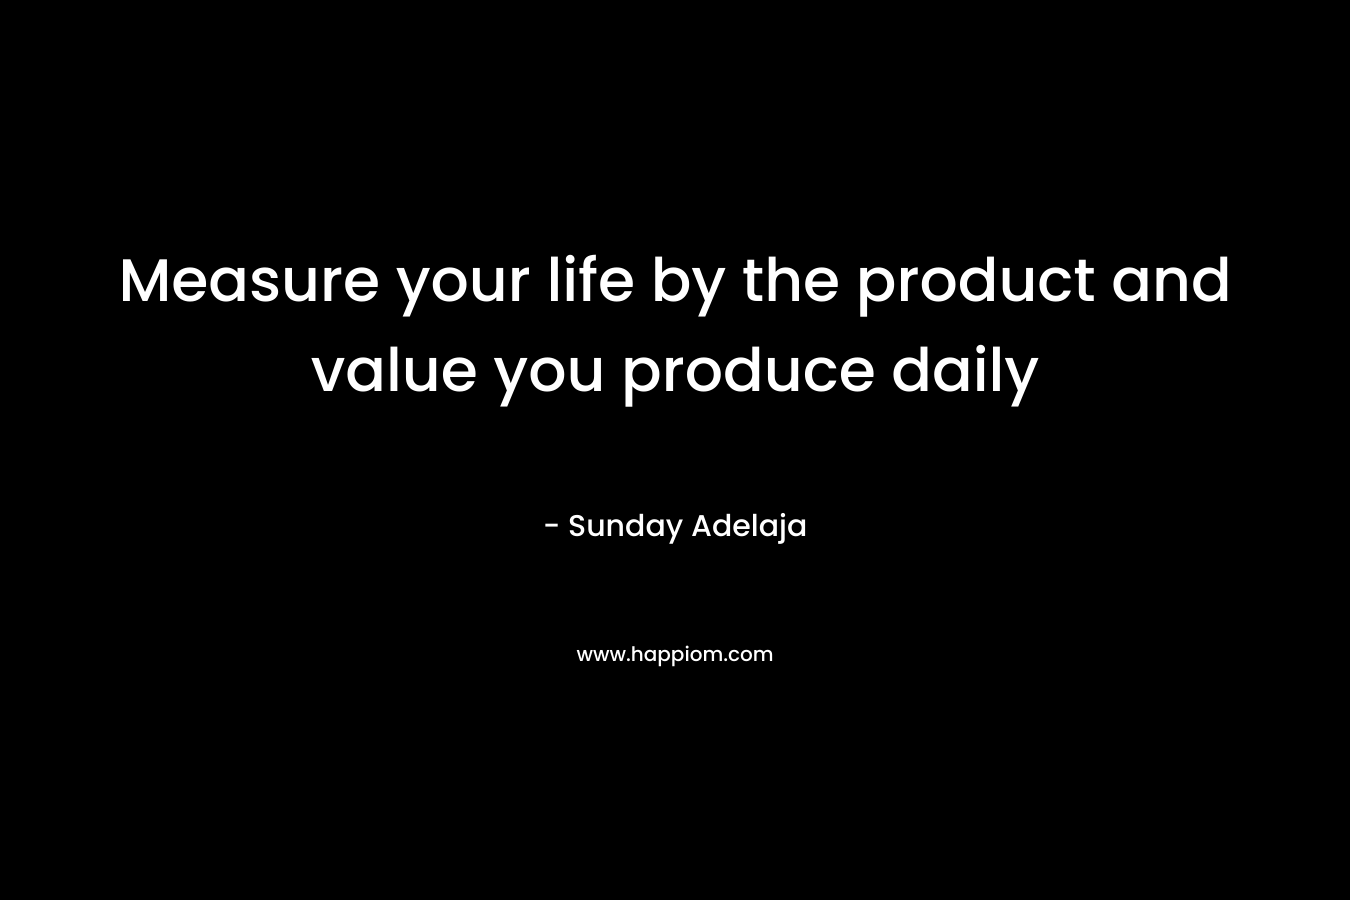 Measure your life by the product and value you produce daily